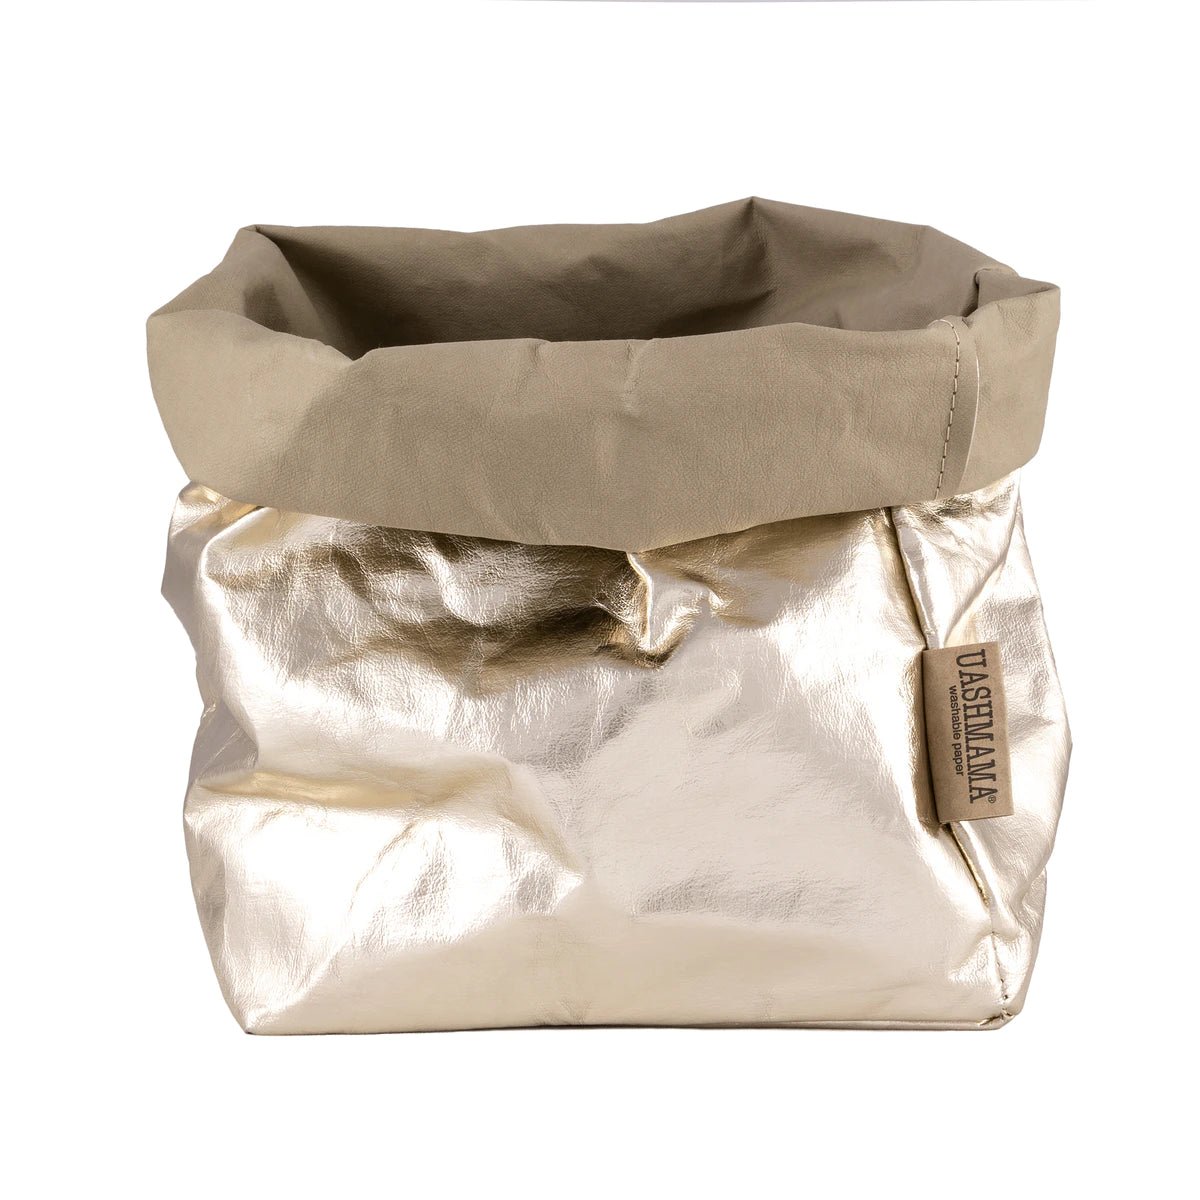 A washable paper bag is shown. The bag is rolled down at the top and features a UASHMAMA logo label on the bottom left corner. The bag pictured is the large plus size in metallic platinum.